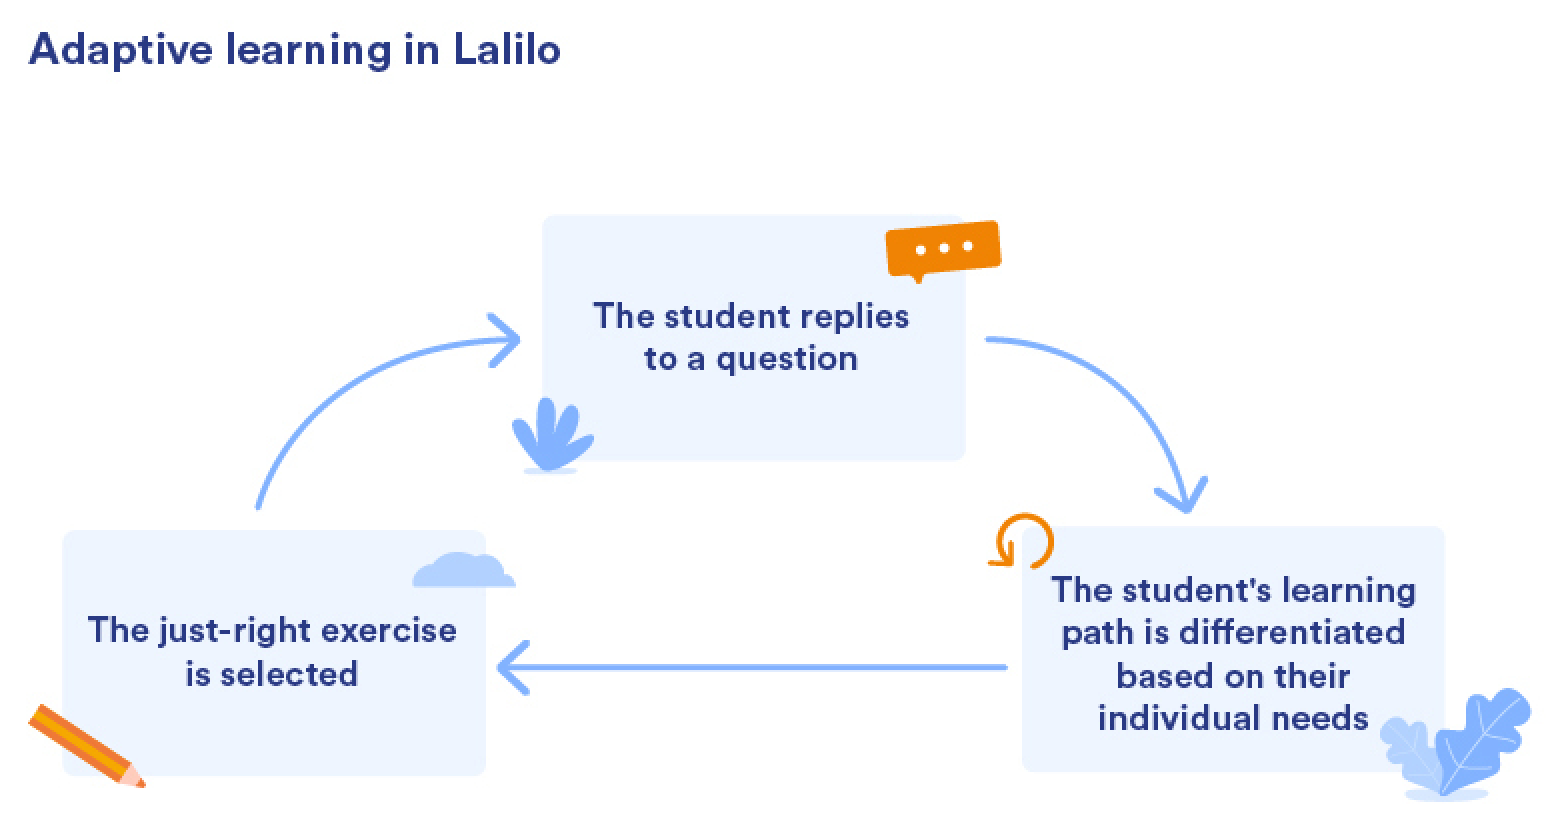 The cycle of adaptive learning in Lalilo: The student replies to a question, the student's learning path is differentiated based on their individual needs, the just-right exercise is selected, which leads back to the start.